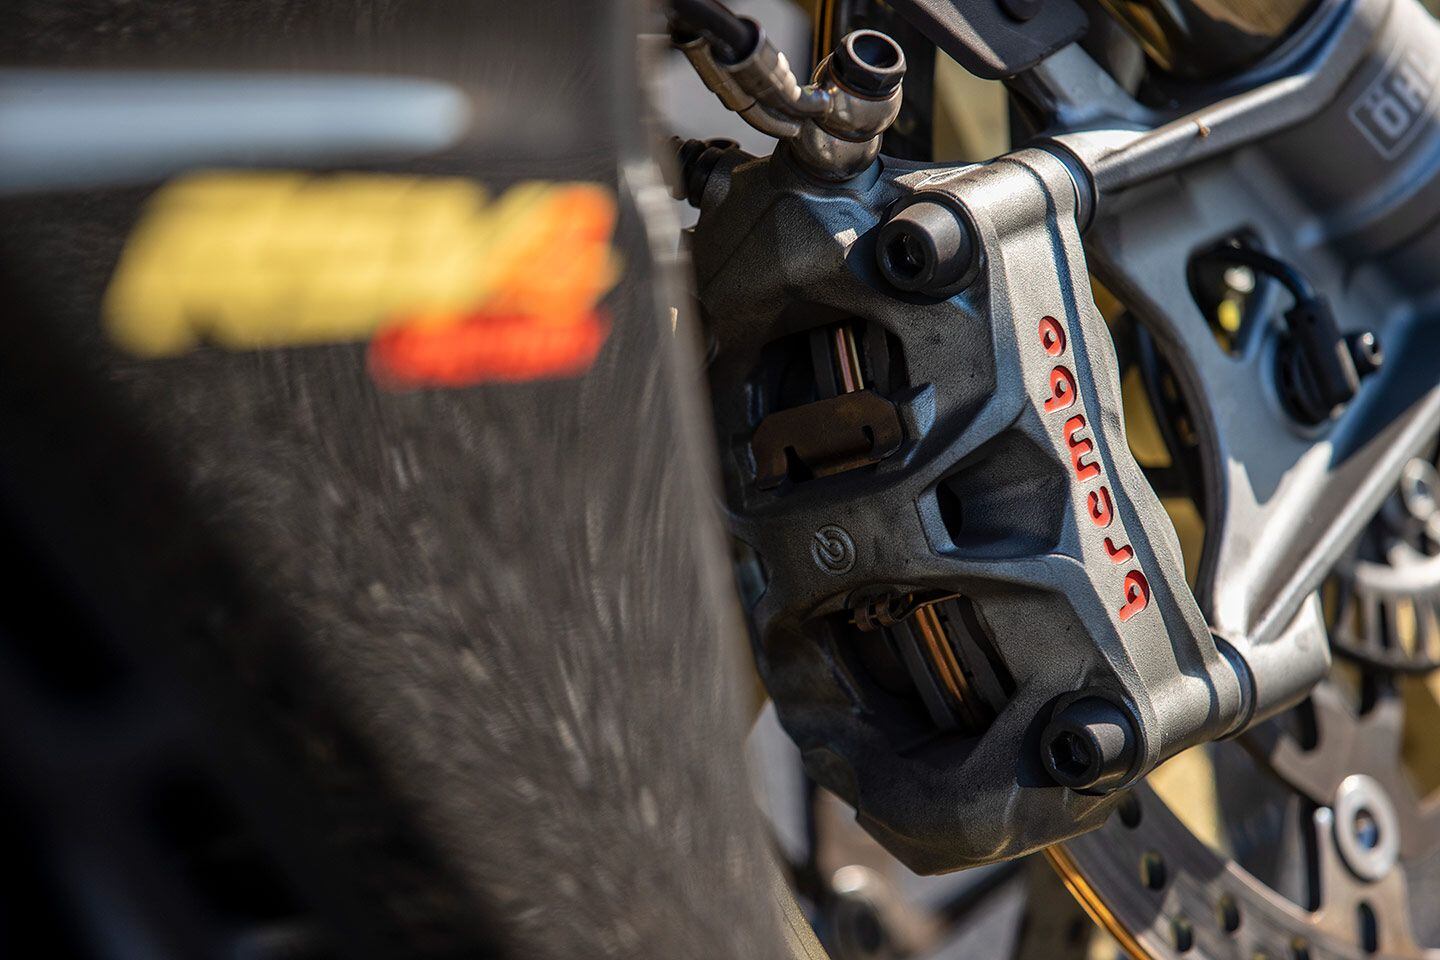 Brembo Stylema monoblock calipers are top-notch components, though the Aprilia is slightly tougher to get slowed down compared to its superbike competition.